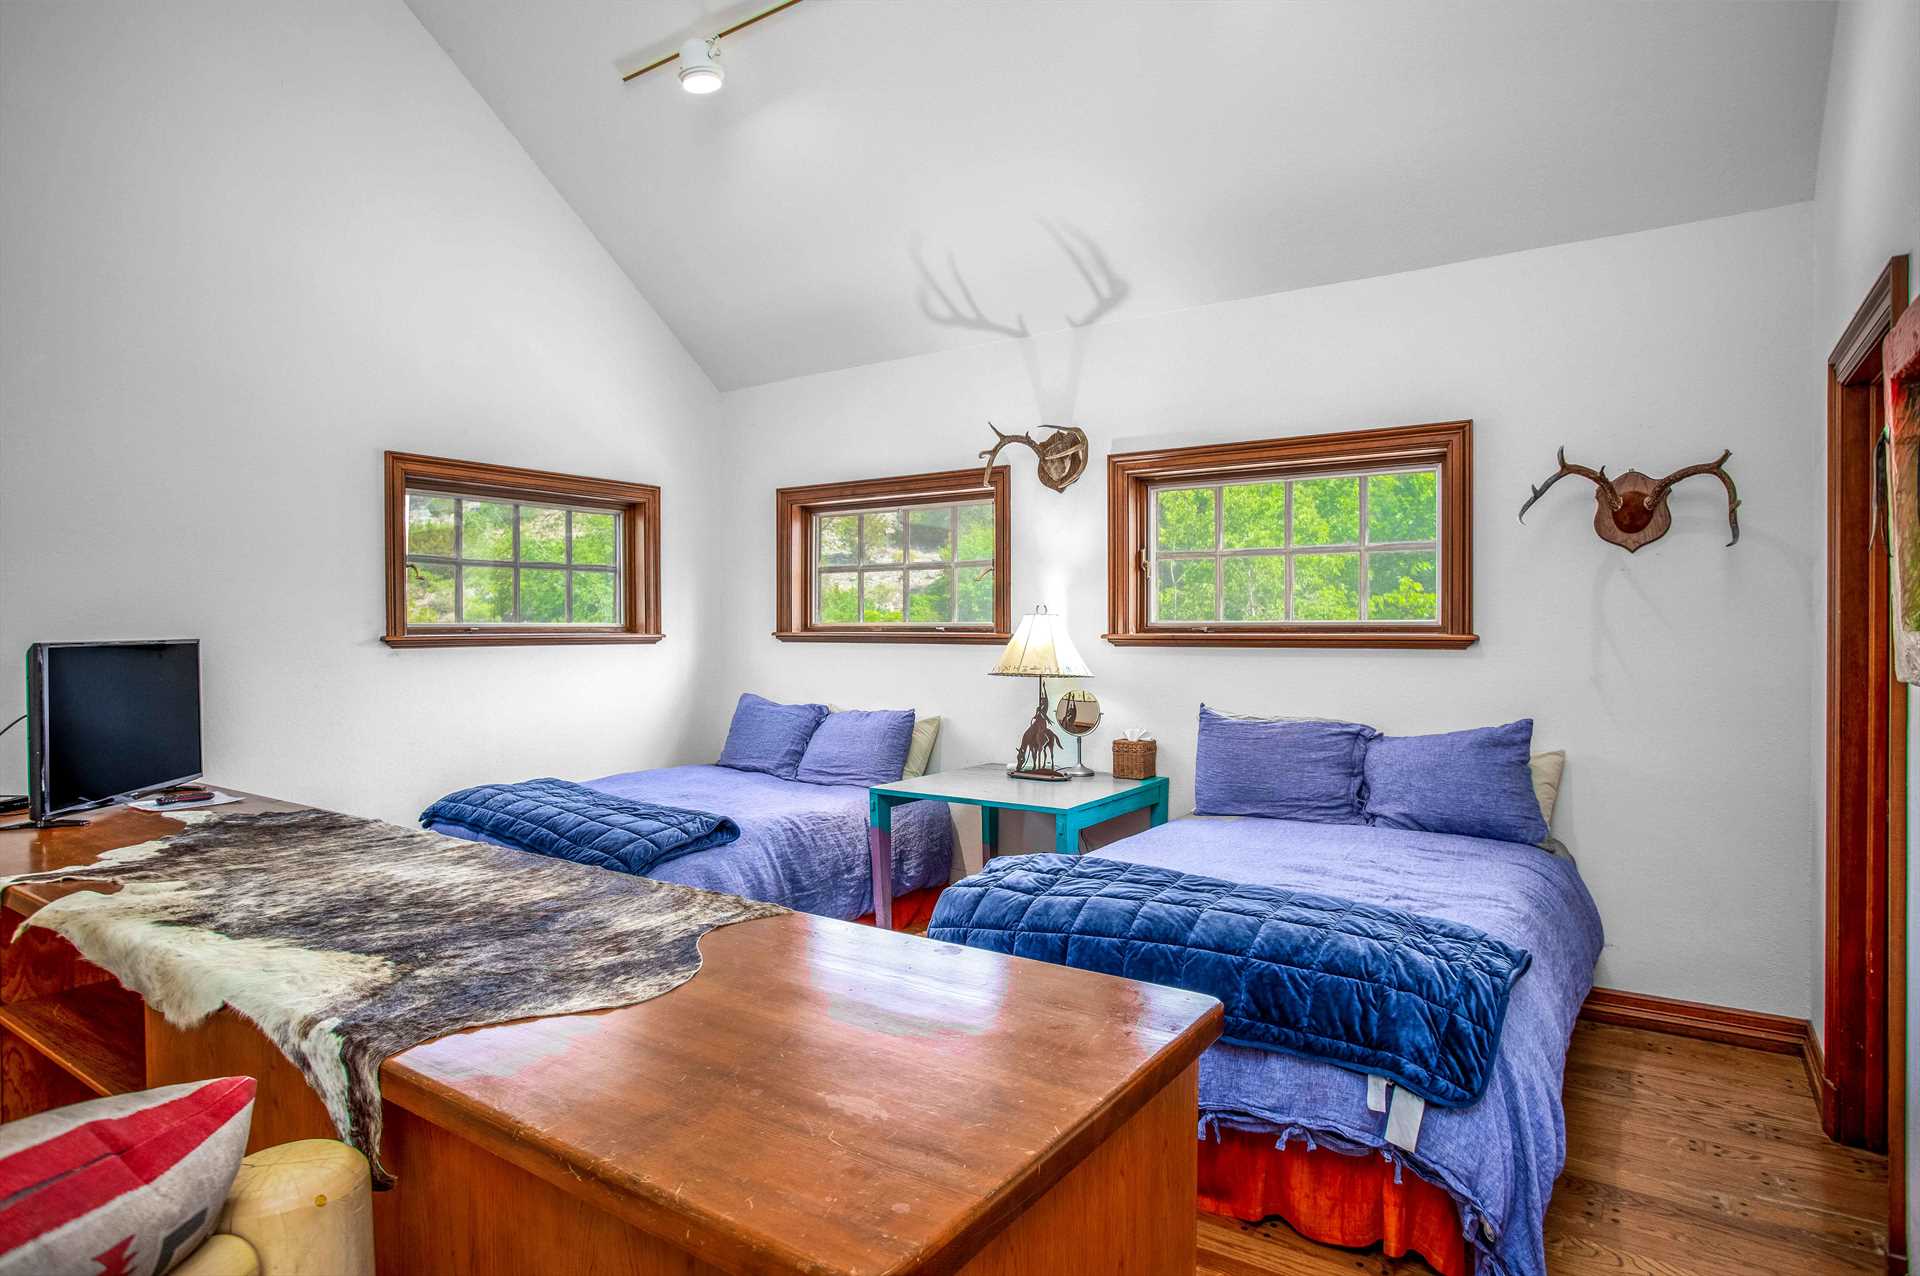                                                 Two queen-sized beds, and an additional double futon, provide comfy sleeping space for up to six in the Casita.